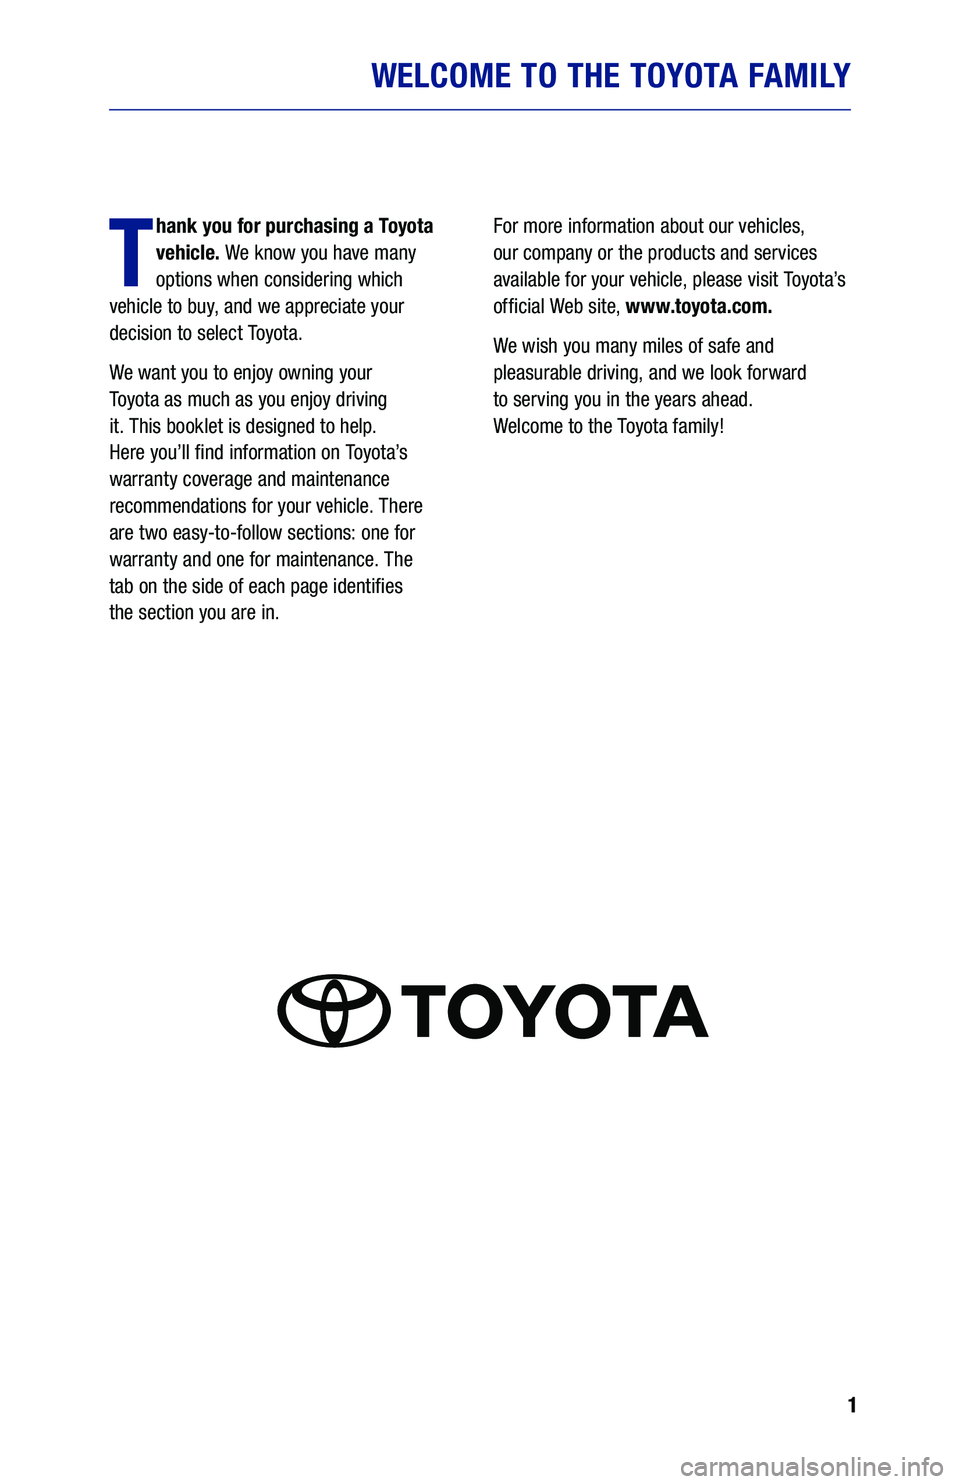 TOYOTA SUPRA 2020  Warranties & Maintenance Guides (in English) 1
T
hank you for purchasing a Toyota 
vehicle.  We know you have many 
options when considering which   
vehicle to buy, and we appreciate your 
decision to select Toyota.
We want you to enjoy owning 